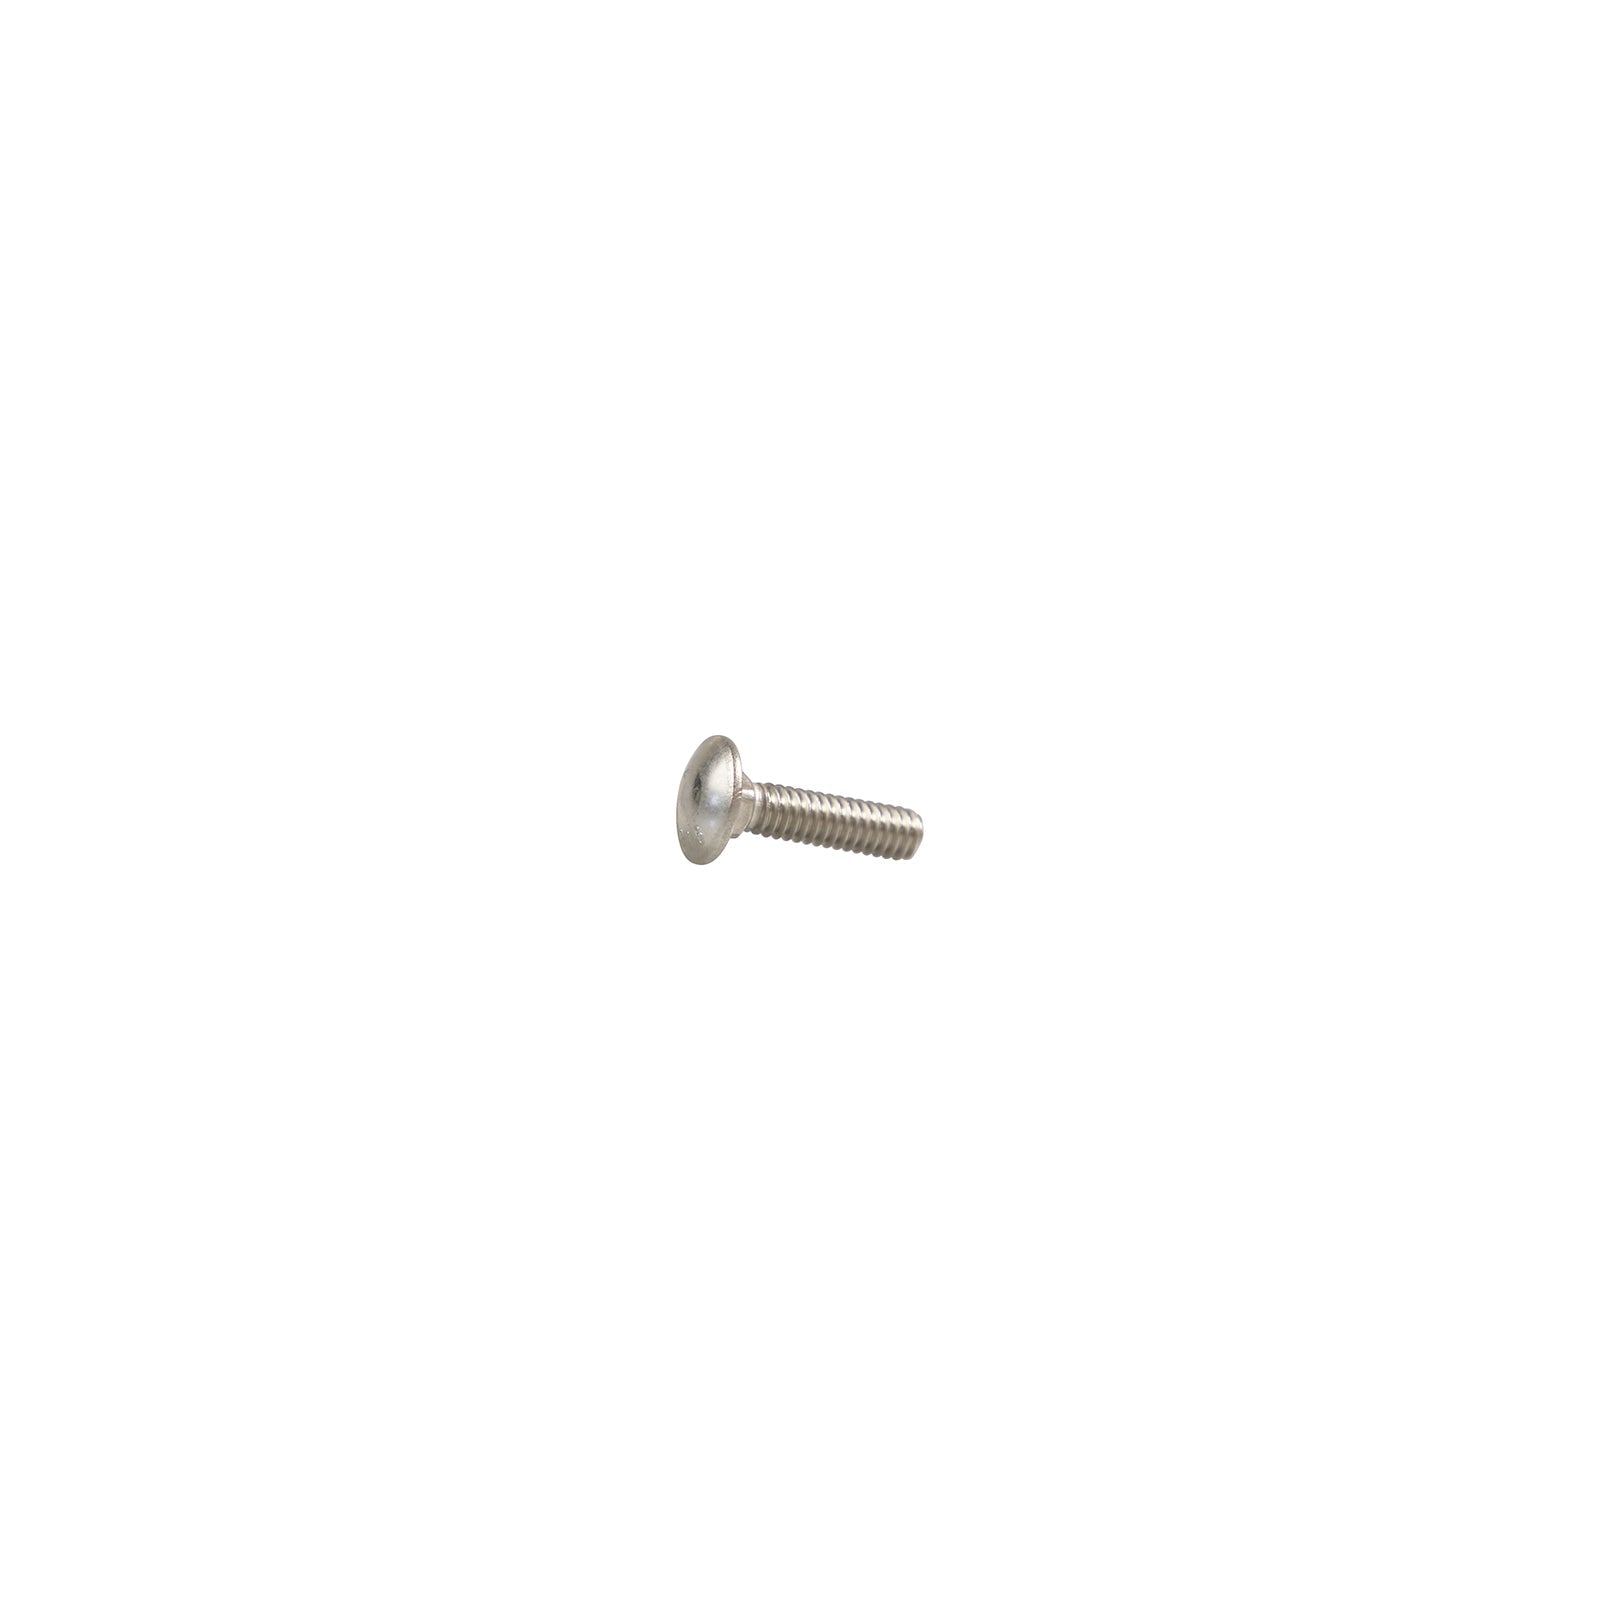 1/4"-20 x 1" Conquest Carriage Bolt - 316 Stainless Steel